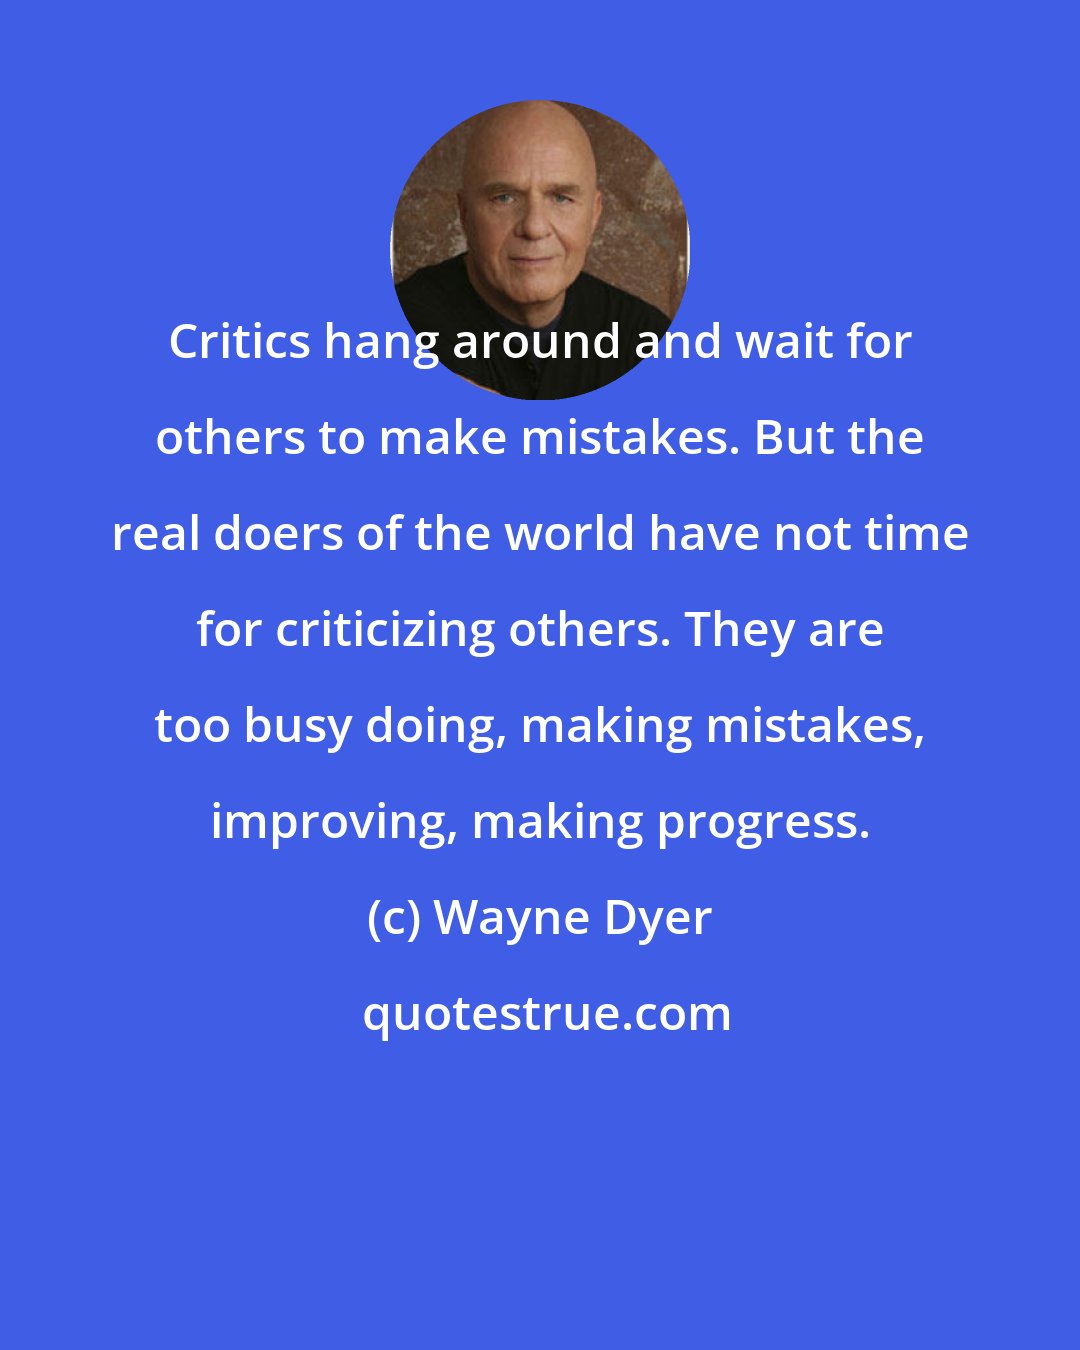 Wayne Dyer: Critics hang around and wait for others to make mistakes. But the real doers of the world have not time for criticizing others. They are too busy doing, making mistakes, improving, making progress.